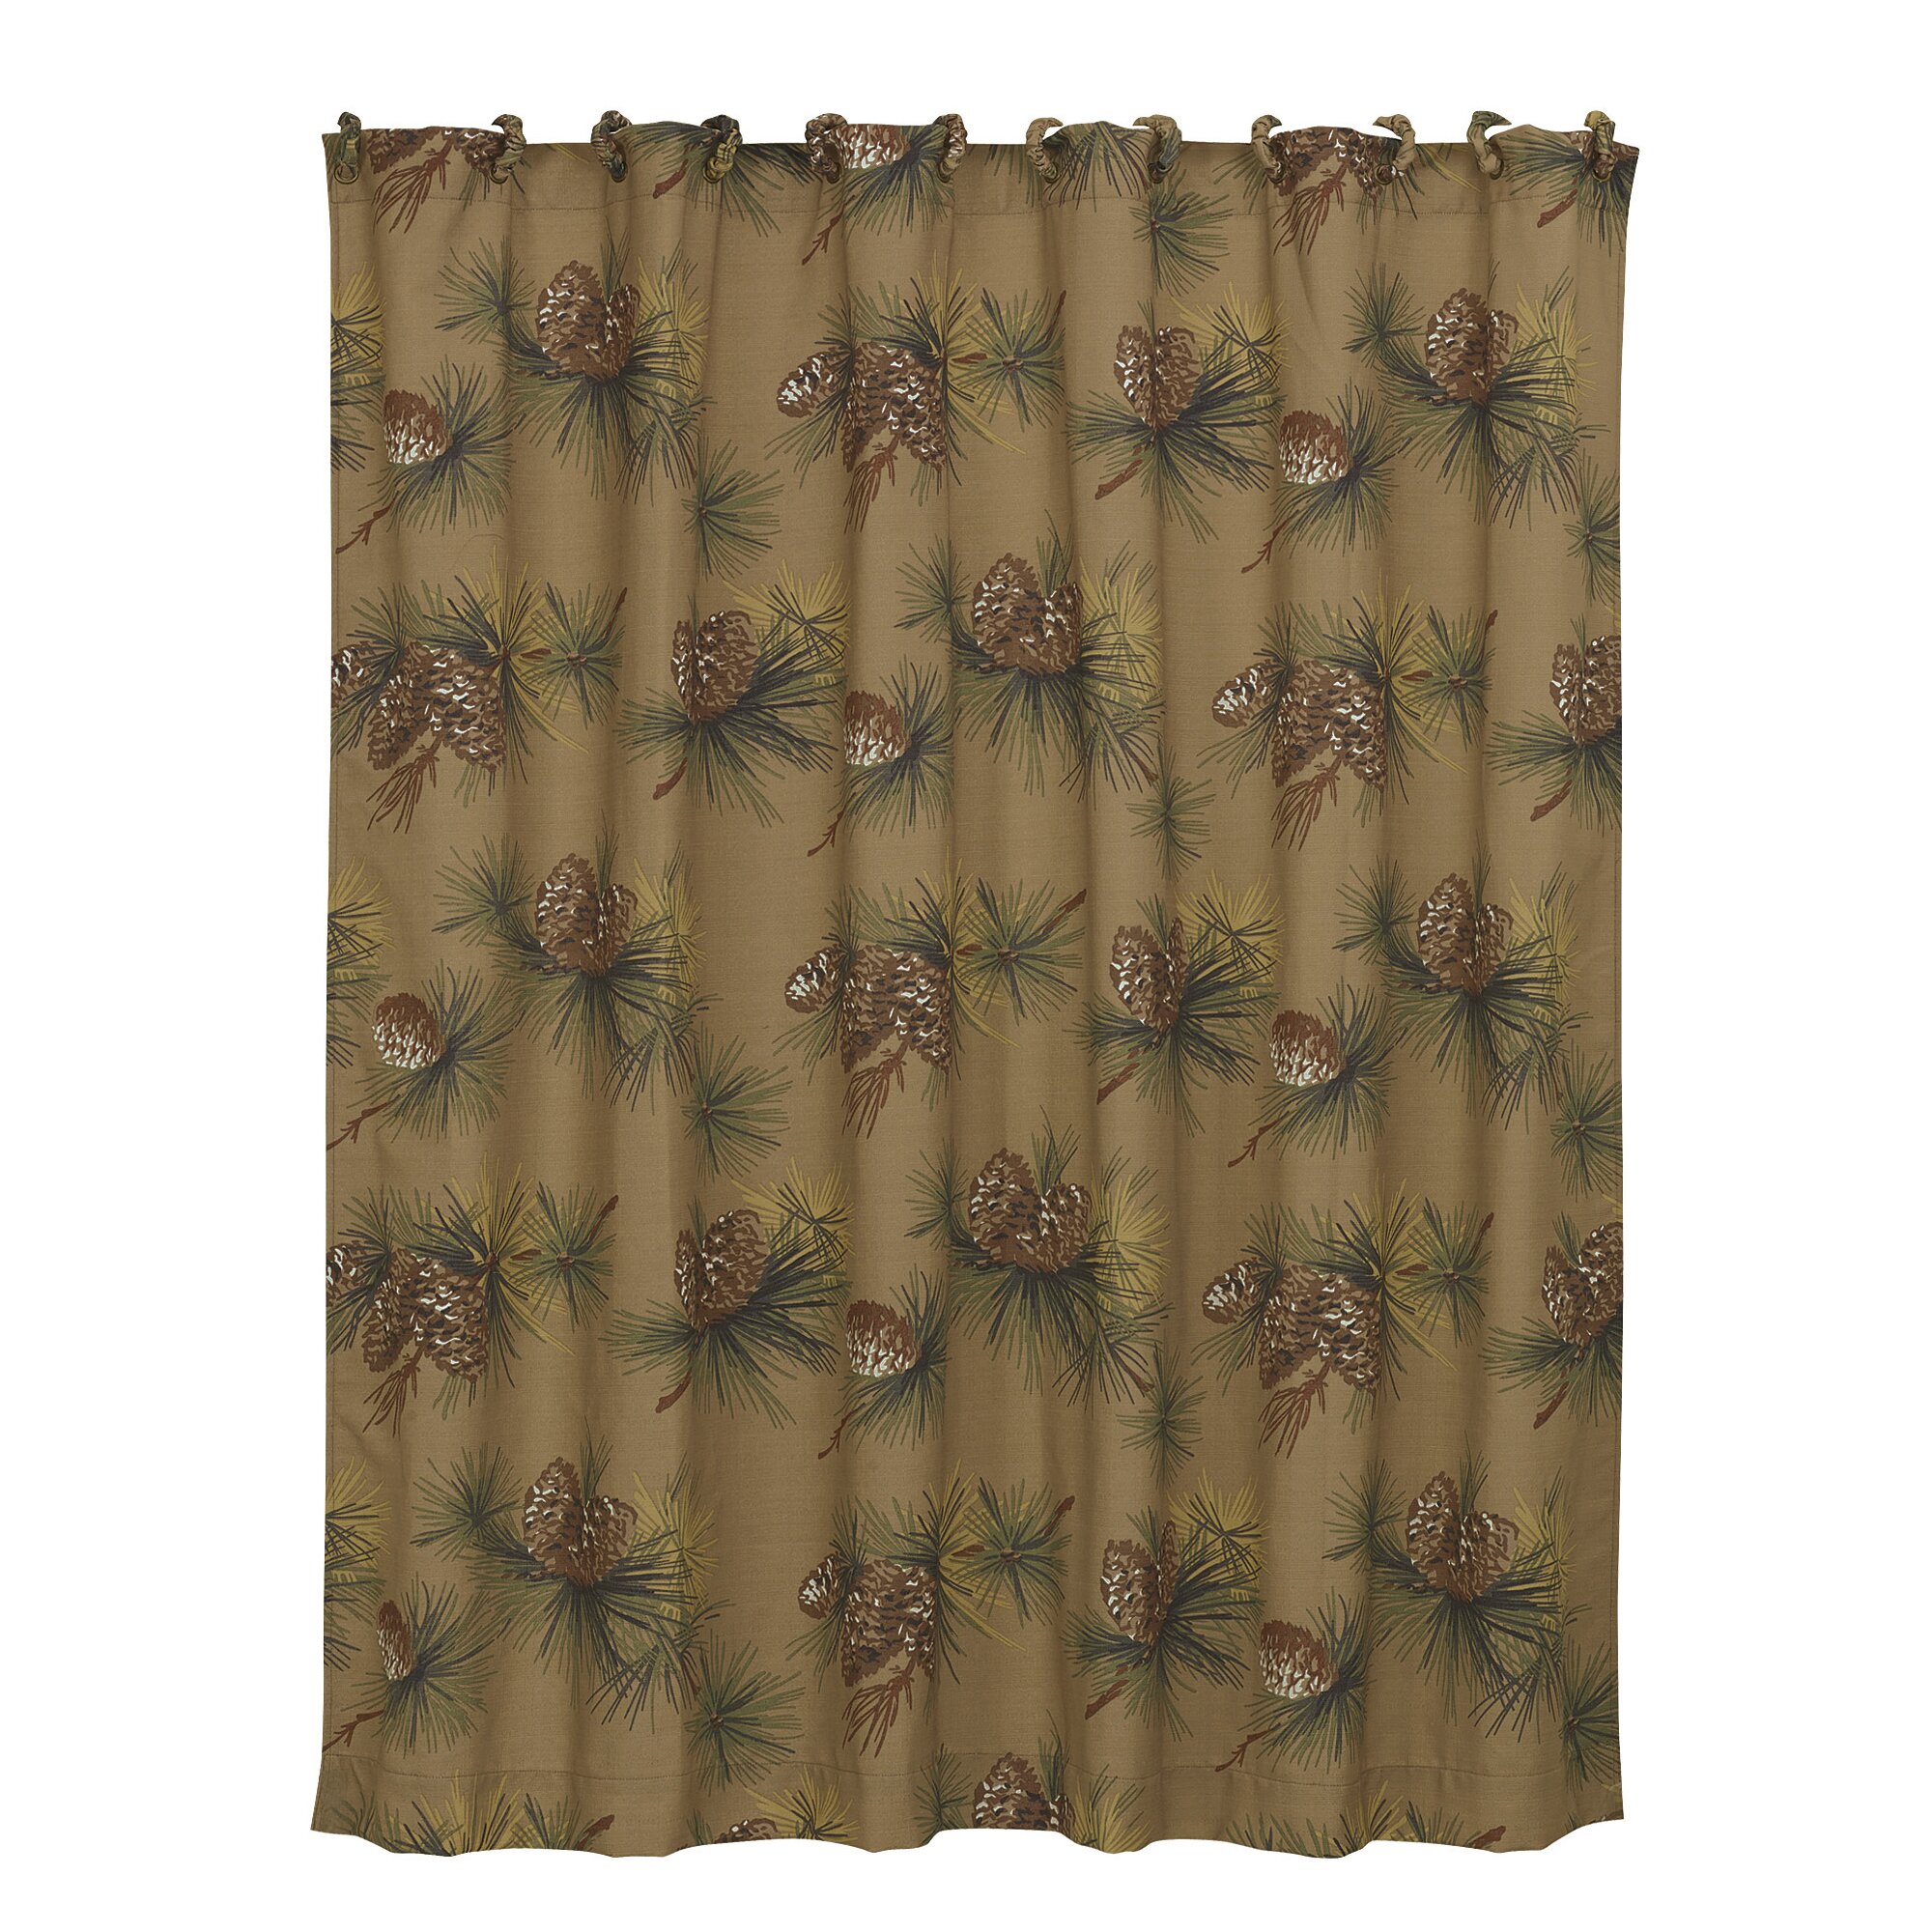 Crestwood Polyester Pinecone Shower Curtain LG1880SC2